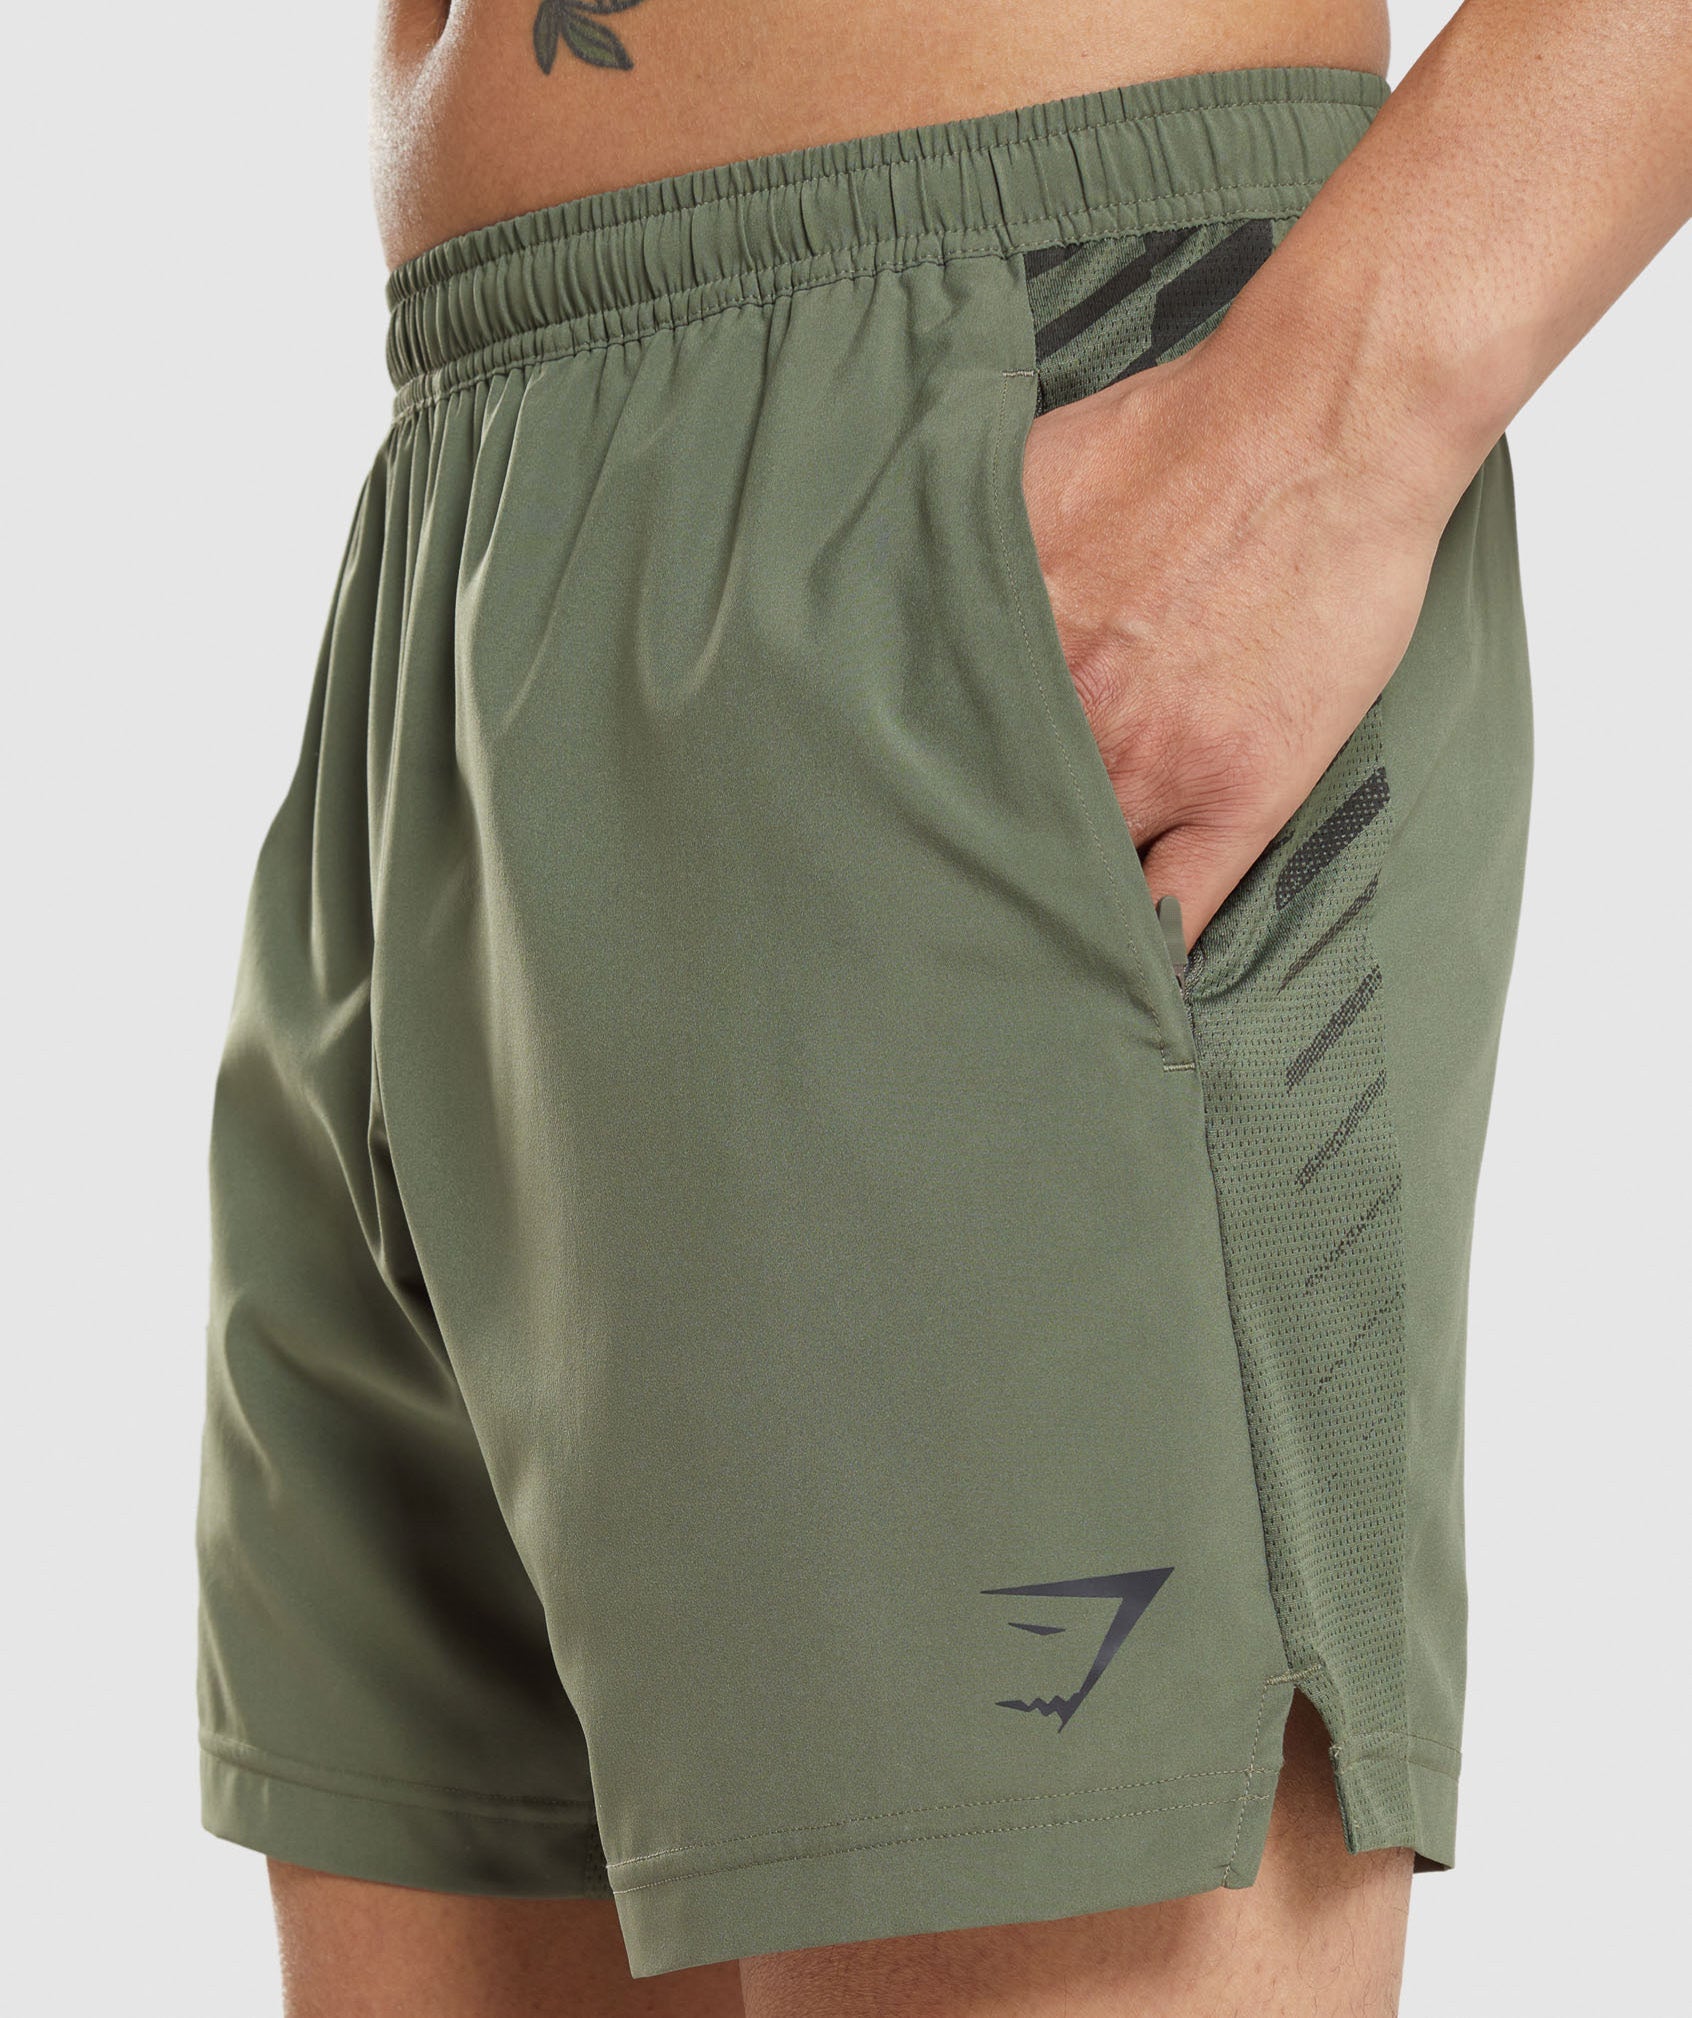 Sport Stripe 7" Shorts in Core Olive - view 6